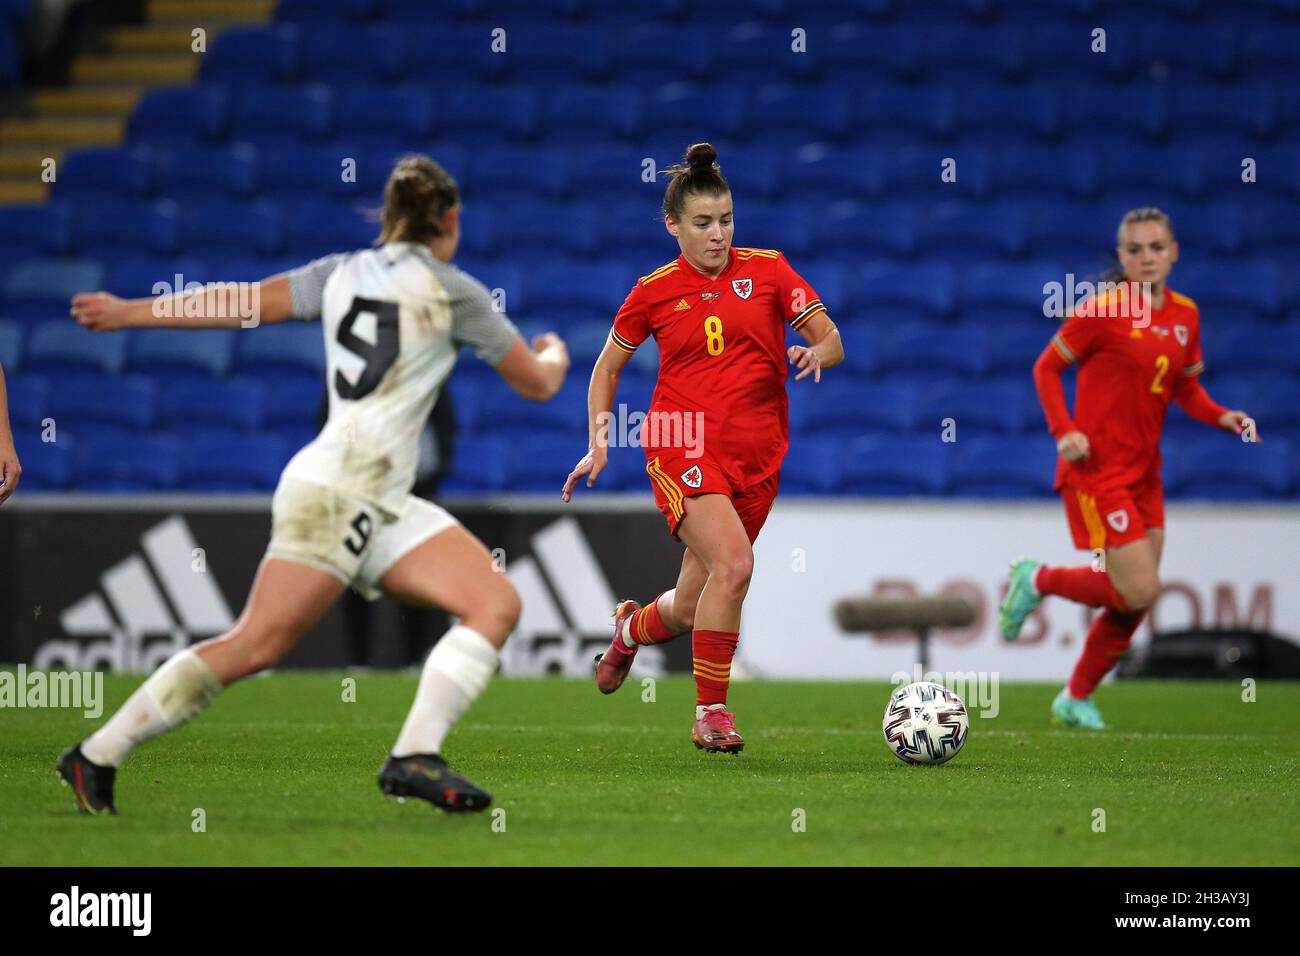 Cardiff, UK. 26th Oct, 2021. Angharad James of Wales (8) in action. Wales women v Estonia women, FIFA Women's World Cup 2023 qualifying match at the Cardiff city Stadium in Cardiff on Tuesday 26th October 2021. Editorial use only, pic by Andrew Orchard/Andrew Orchard sports photography/Alamy Live news Credit: Andrew Orchard sports photography/Alamy Live News Stock Photo